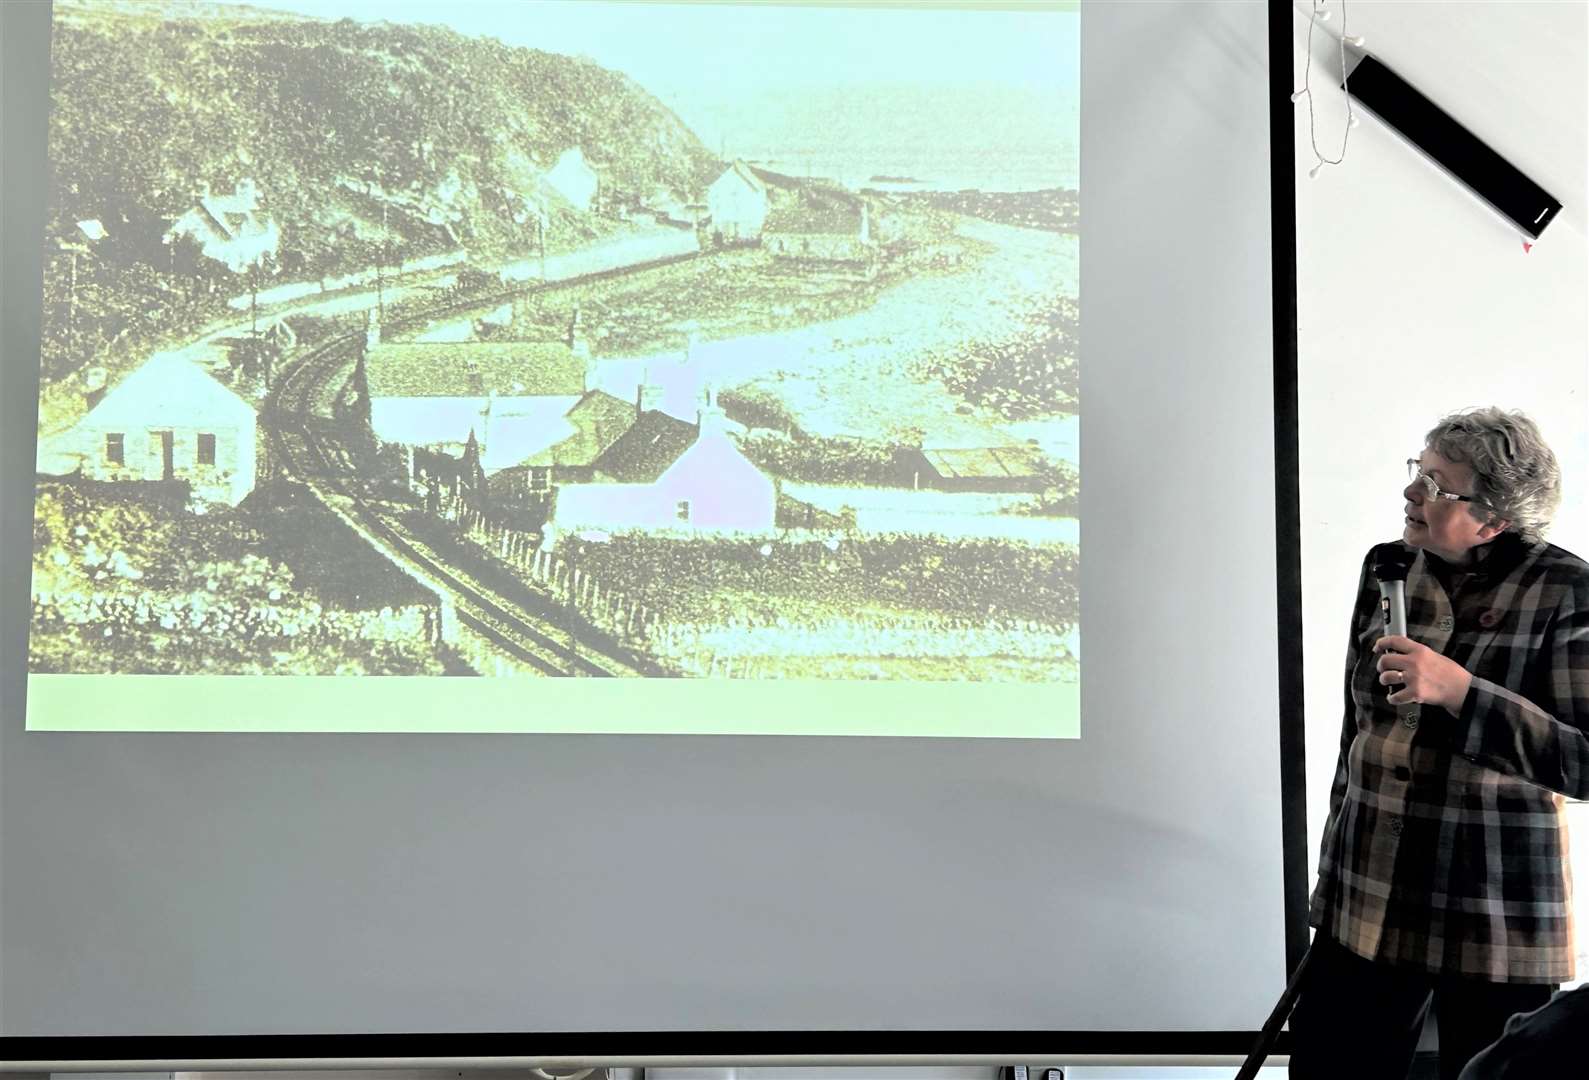 Esther McDonald gave a presentation on "Portgower and What Came Before".